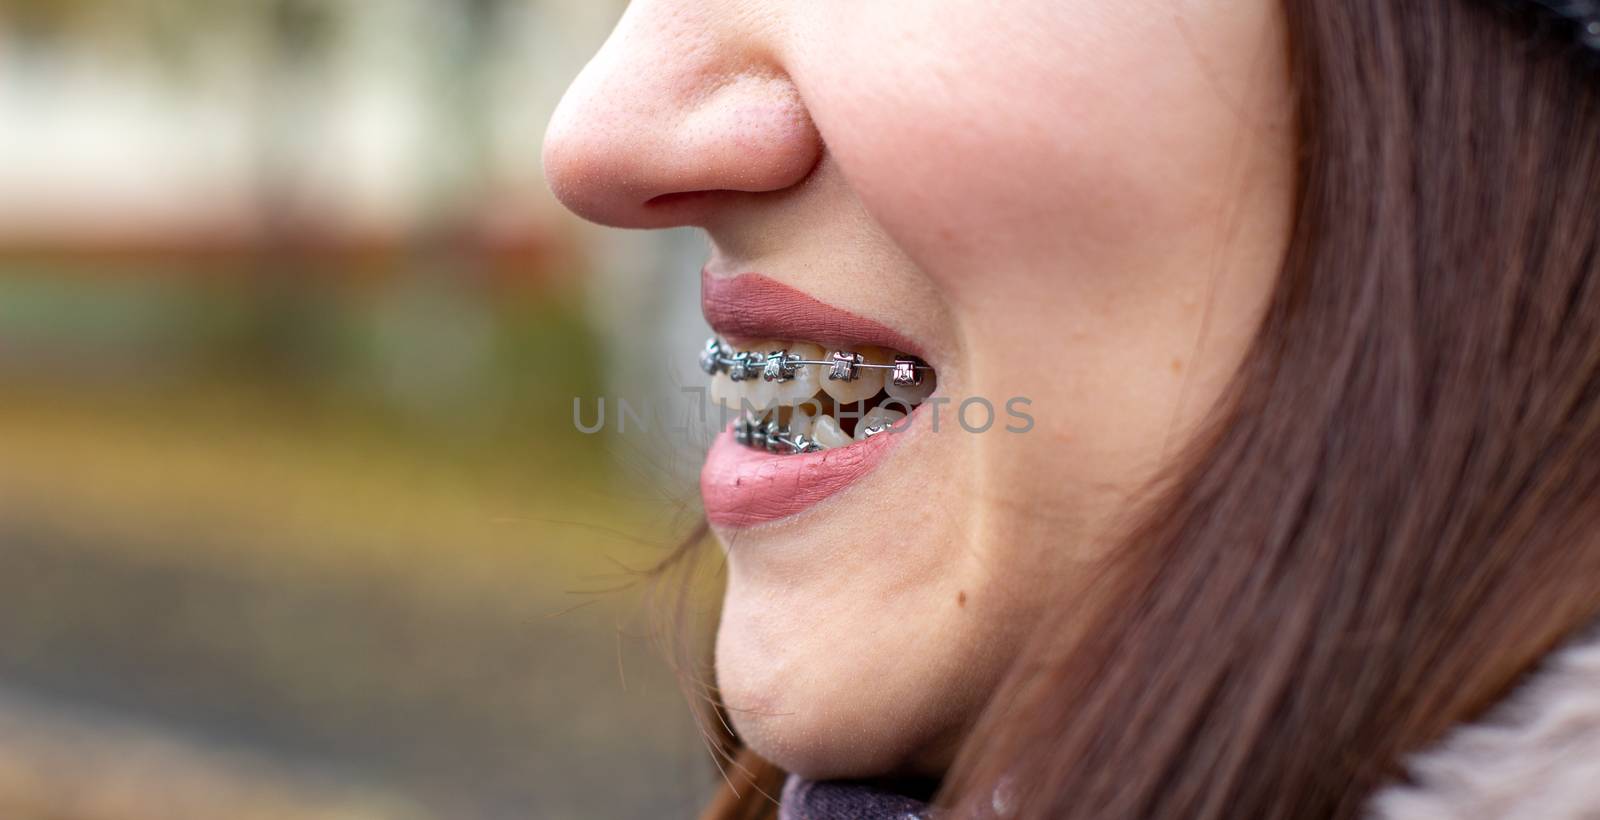 Brasket system in a girl's smiling mouth, macro photography of teeth, close-up of lips